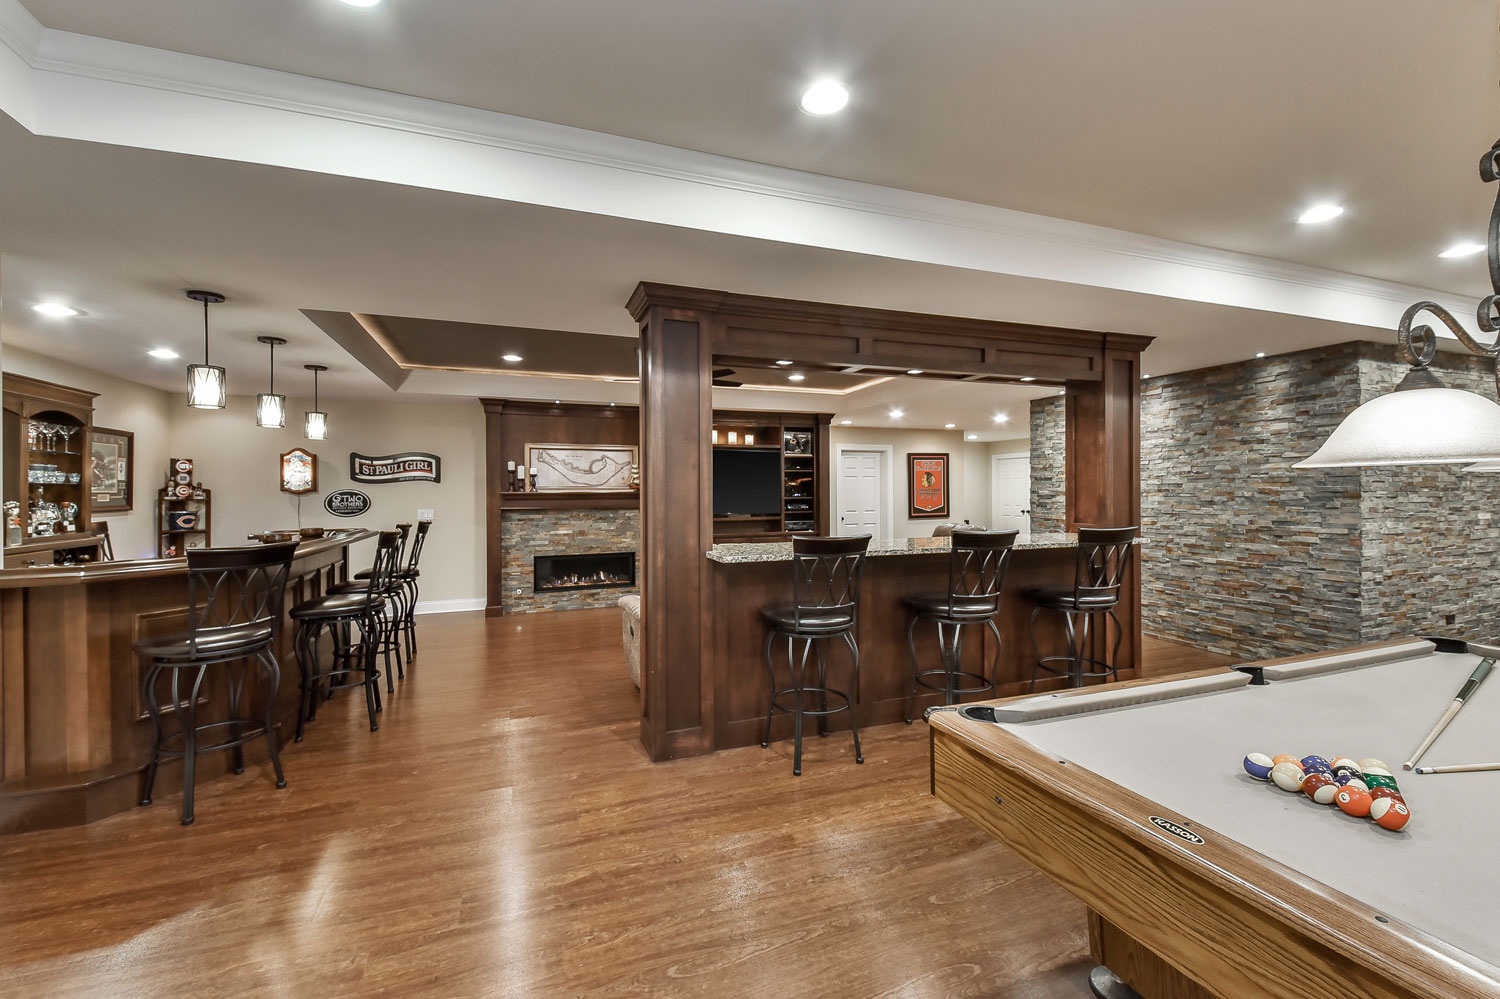 How Much Should Be Spent On Basement Remodeling?